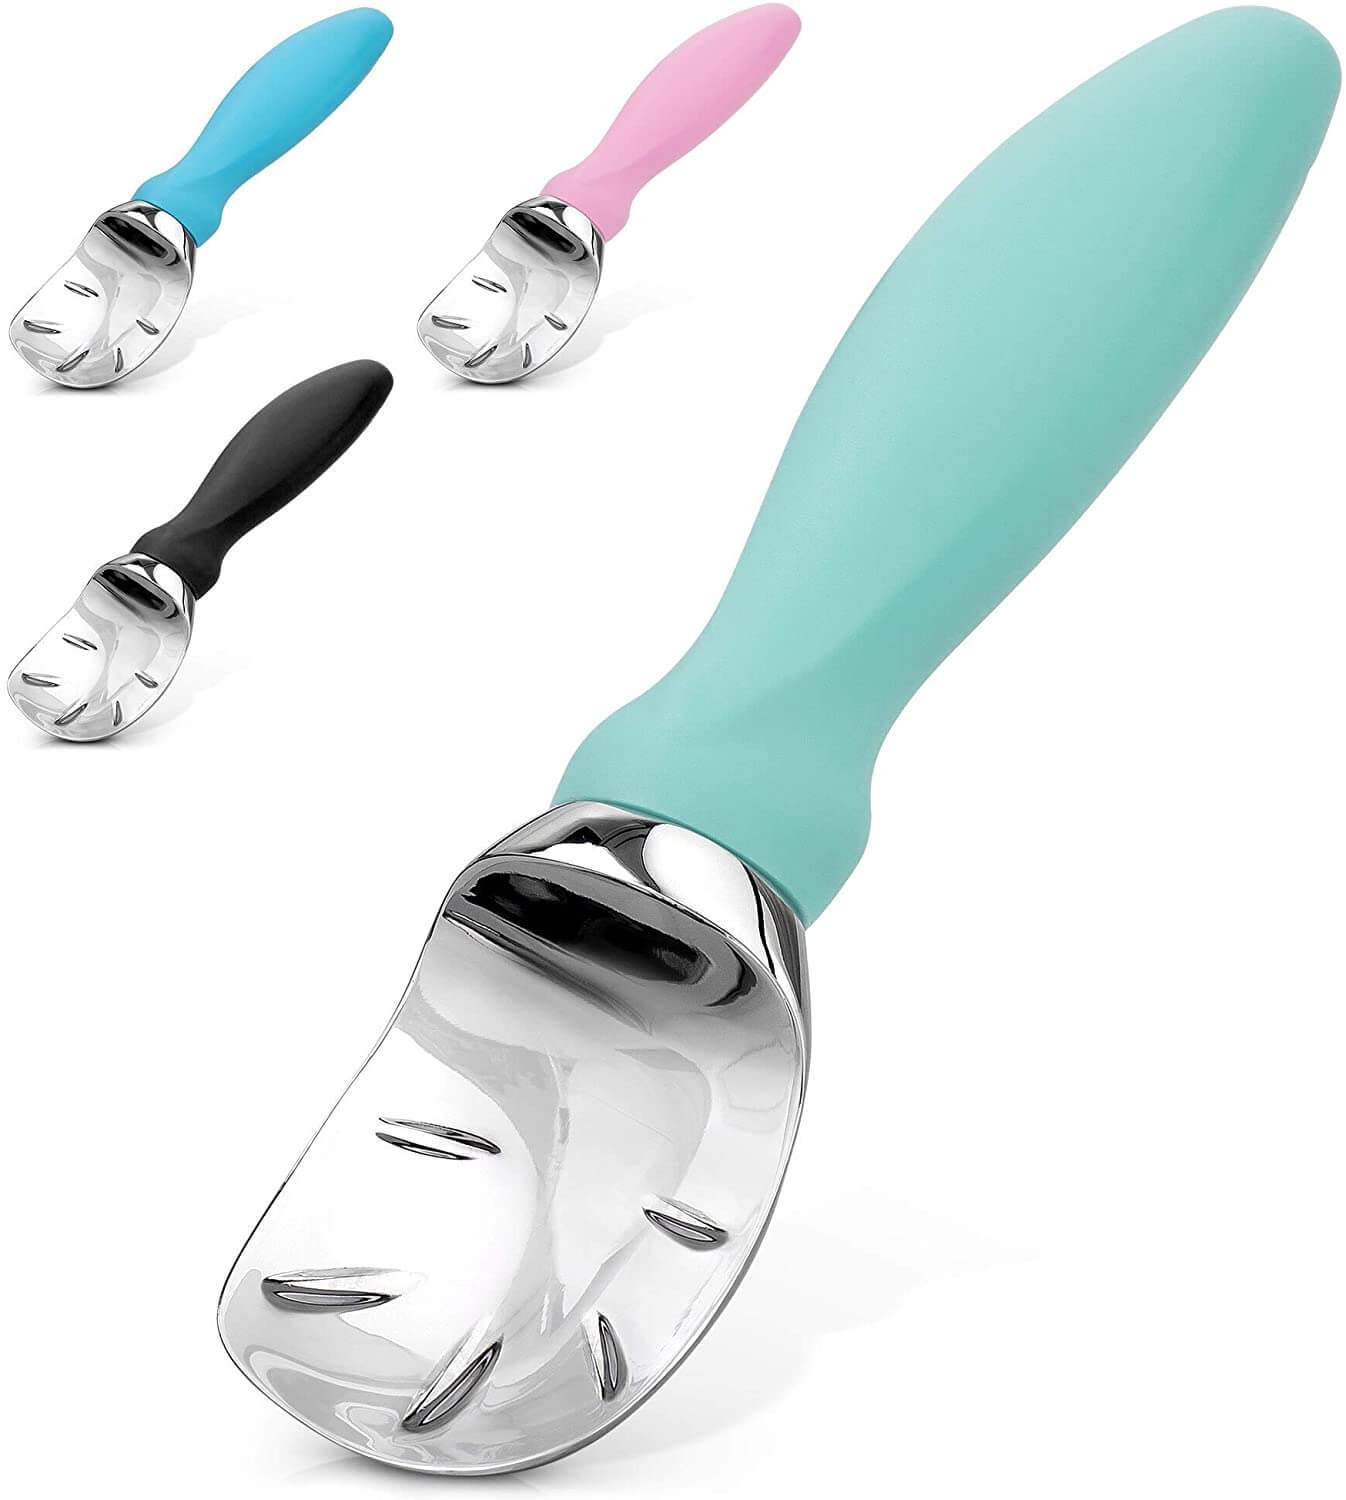 Ice Cream Scoops Set Of 3, Cookie Scoop For Baking Stainless Steel With  Anti Slip Rubber Grip, Cookie Dough Scooper